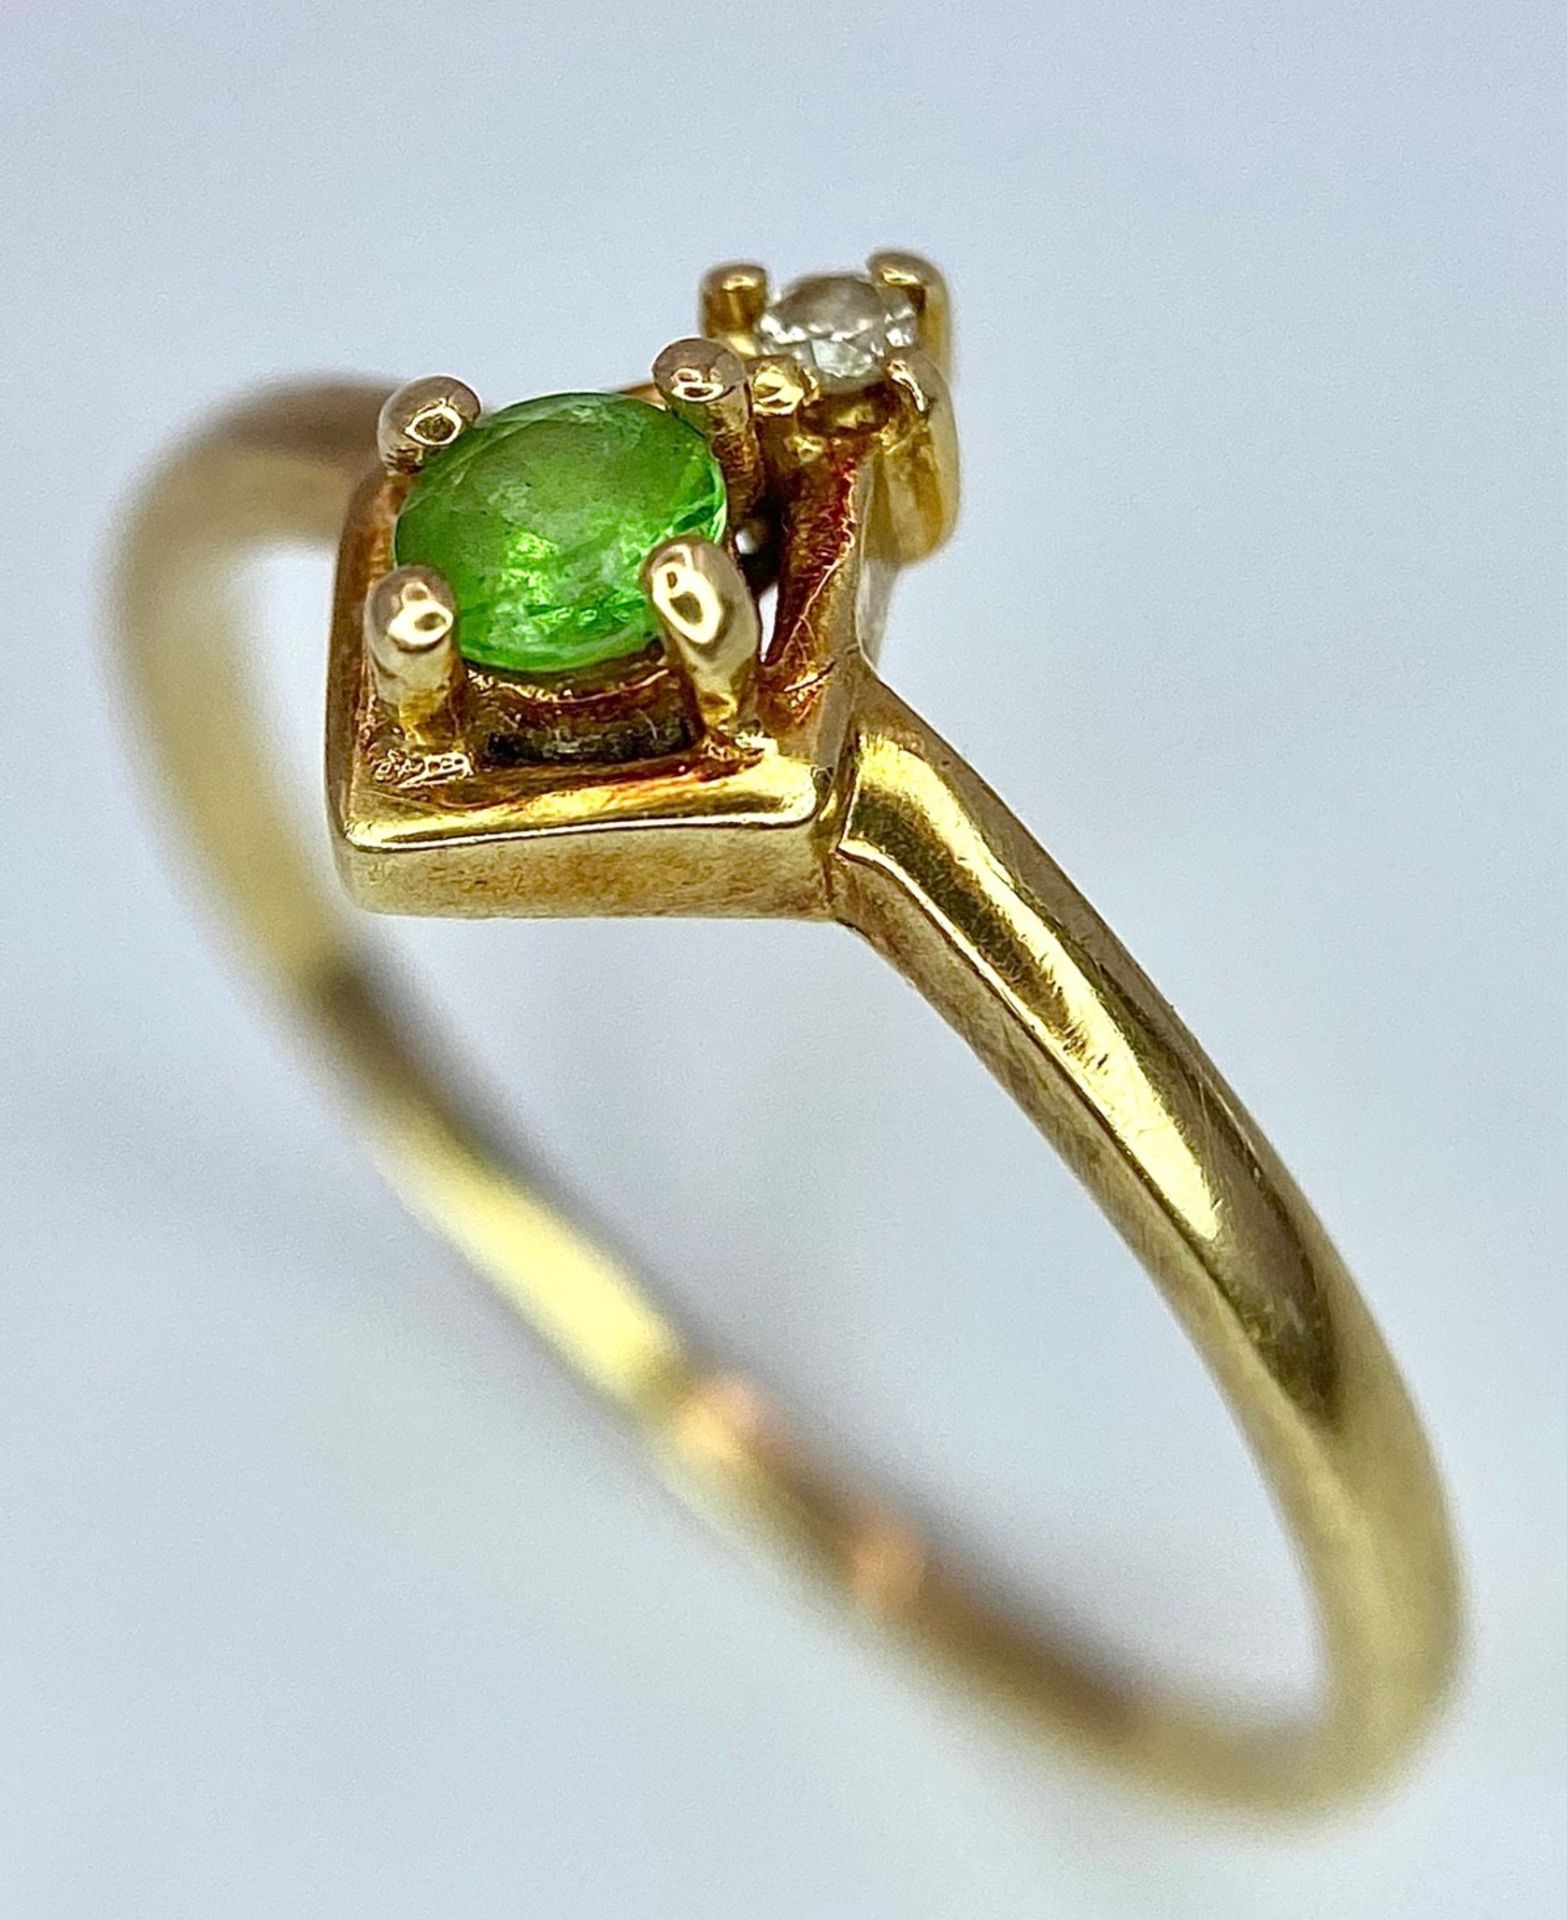 A14K YELLOW GOLD PERIDOT & DIAMOND RING. Size K/L, 1.4g total weight. Ref: SC 9030 - Image 3 of 6